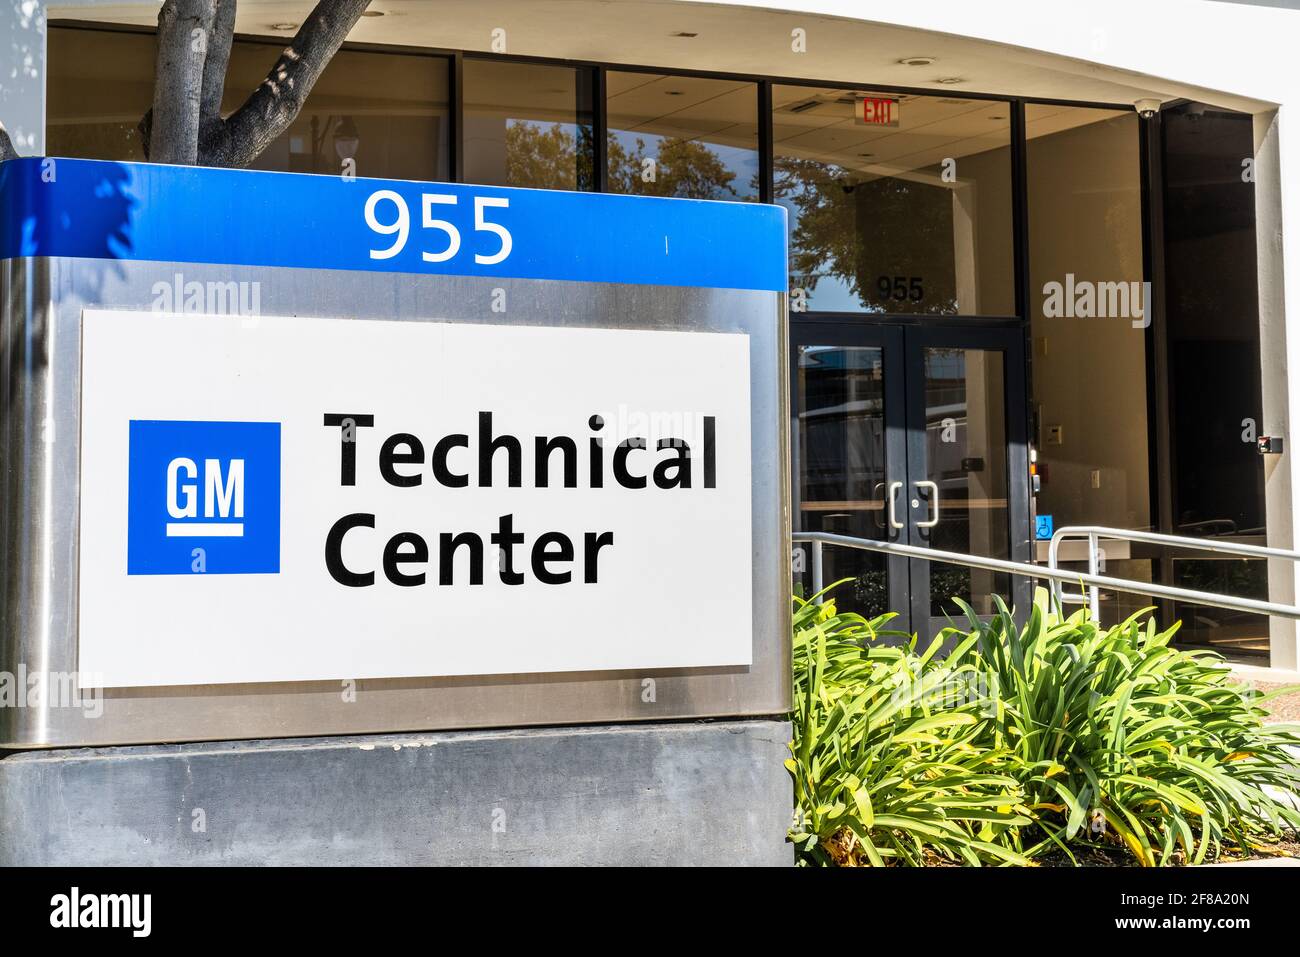 Sep 26, 2020 Sunnyvale / CA / USA - General Motors (GM) Advanced Technical Center located in Silicon Valley; Stock Photo